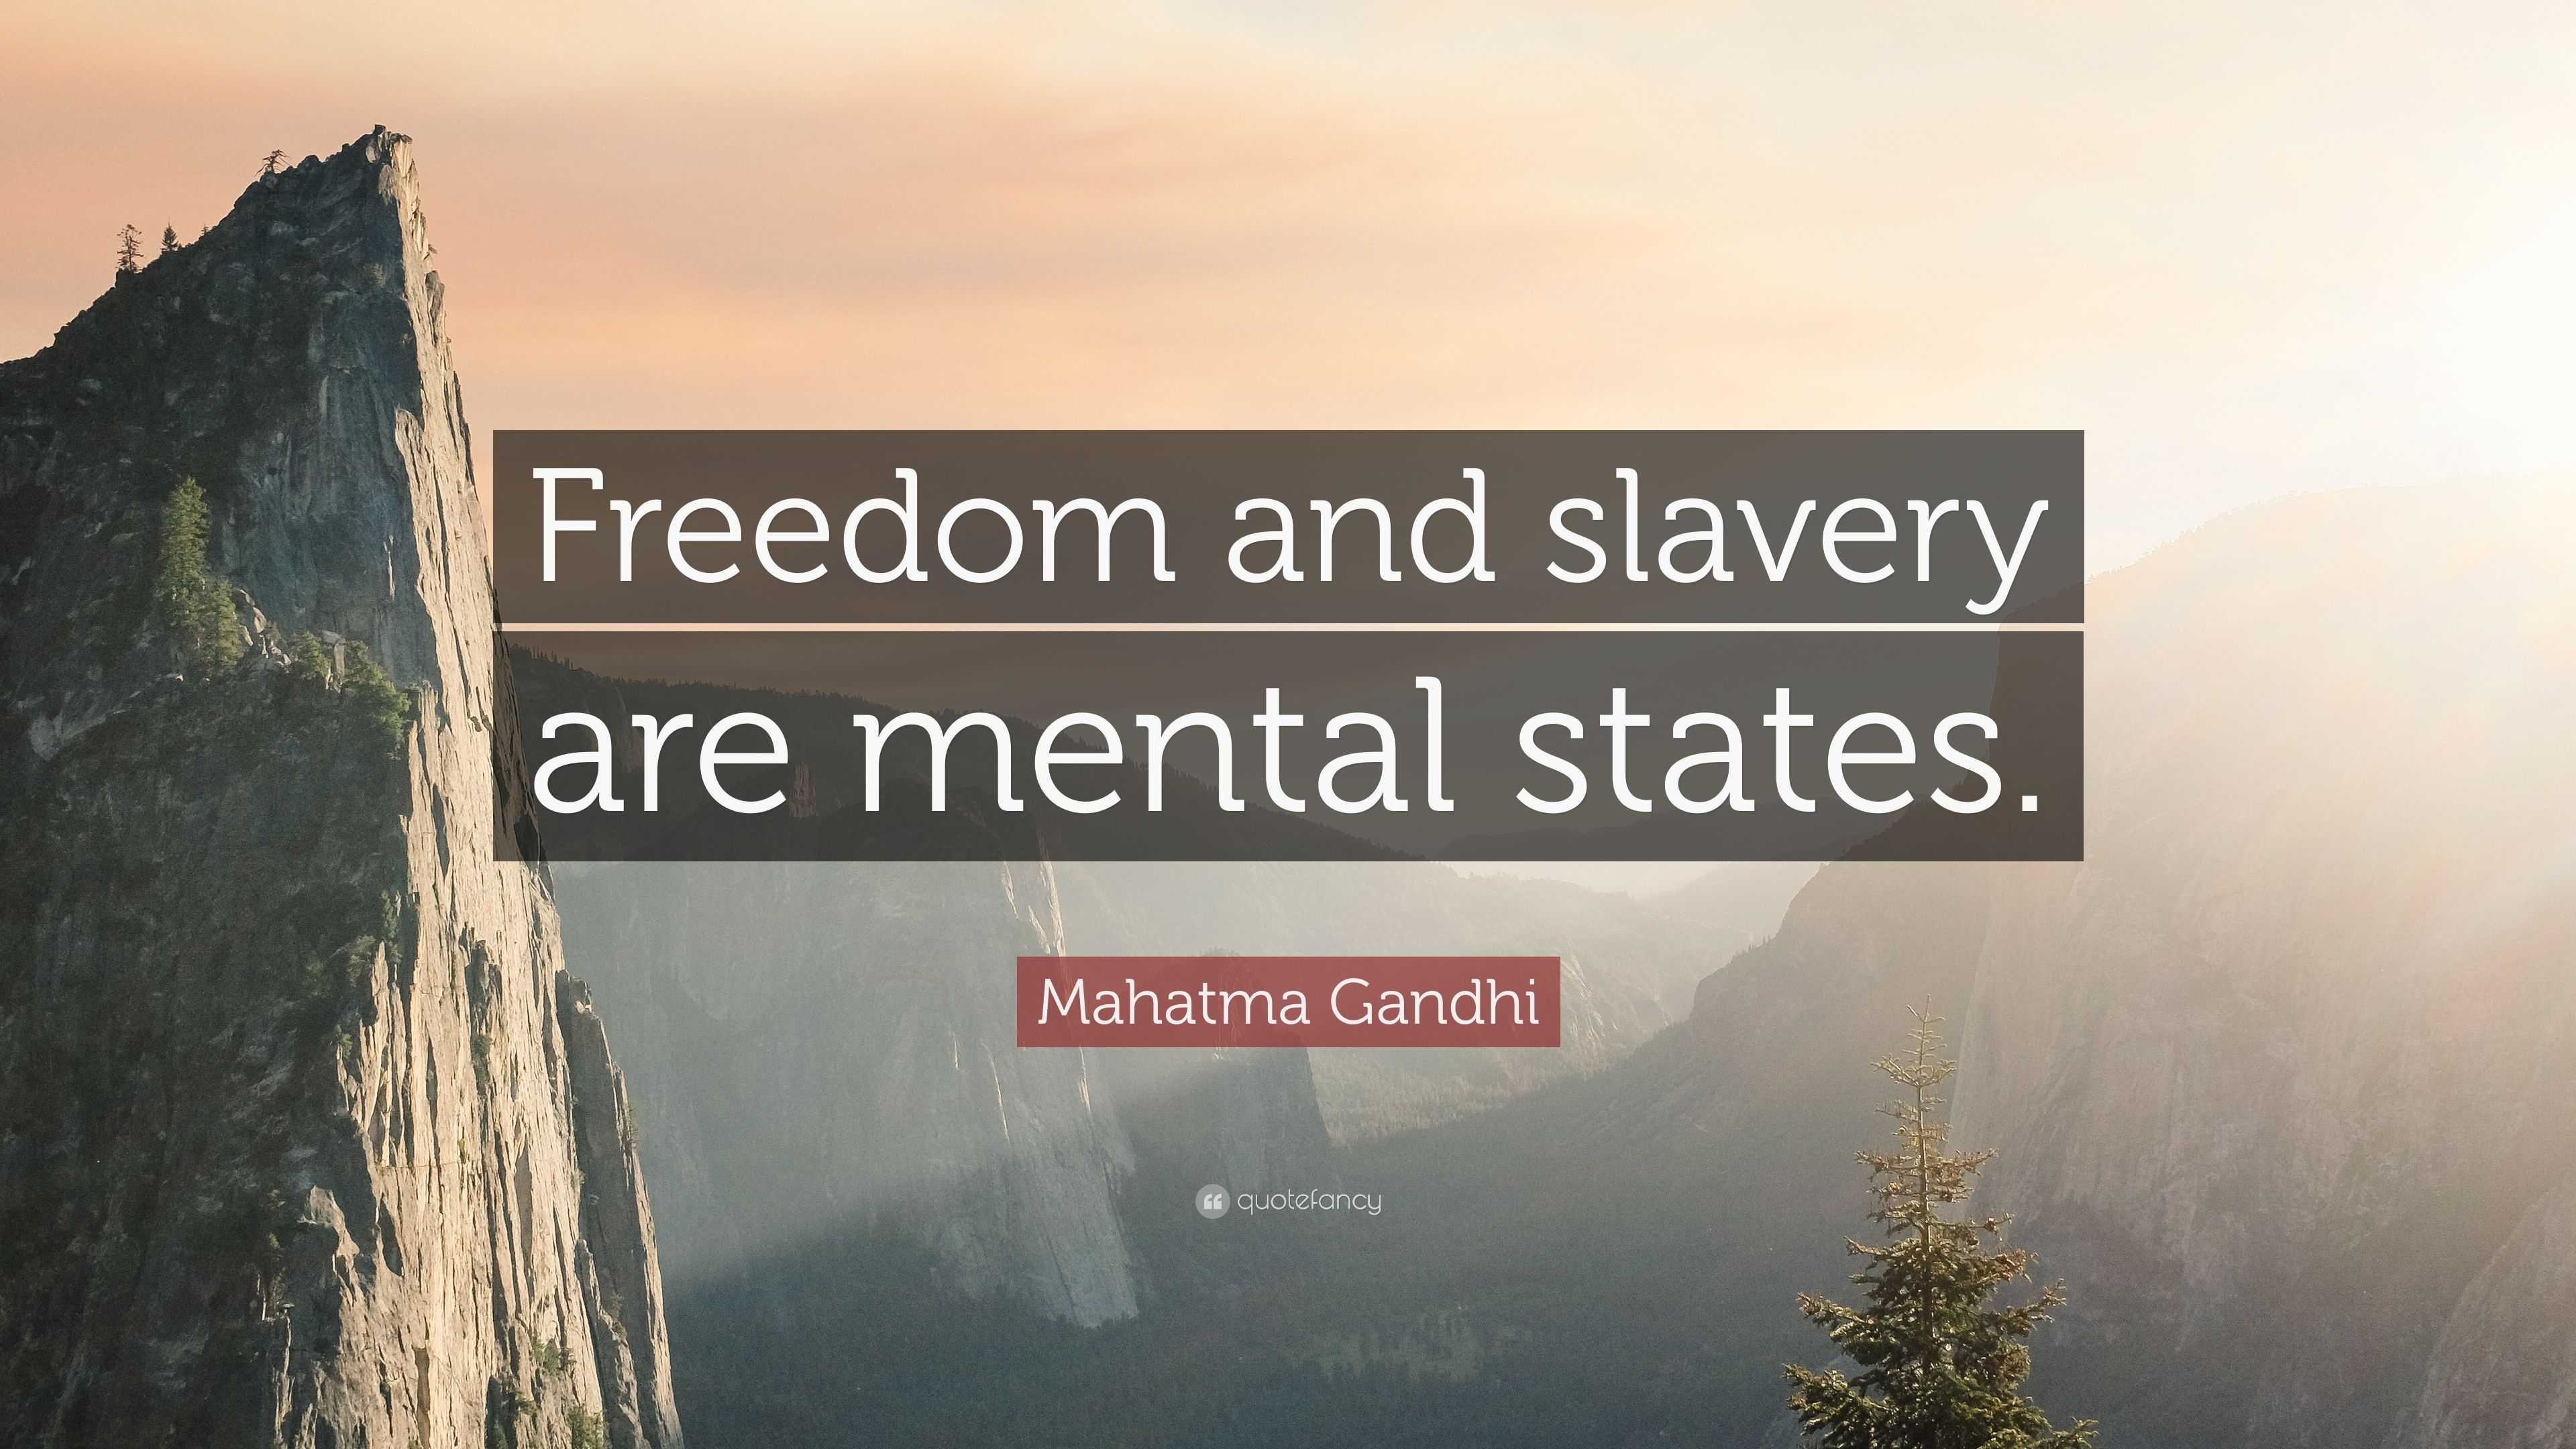 Mahatma Gandhi Quote “Freedom and slavery are mental states.”